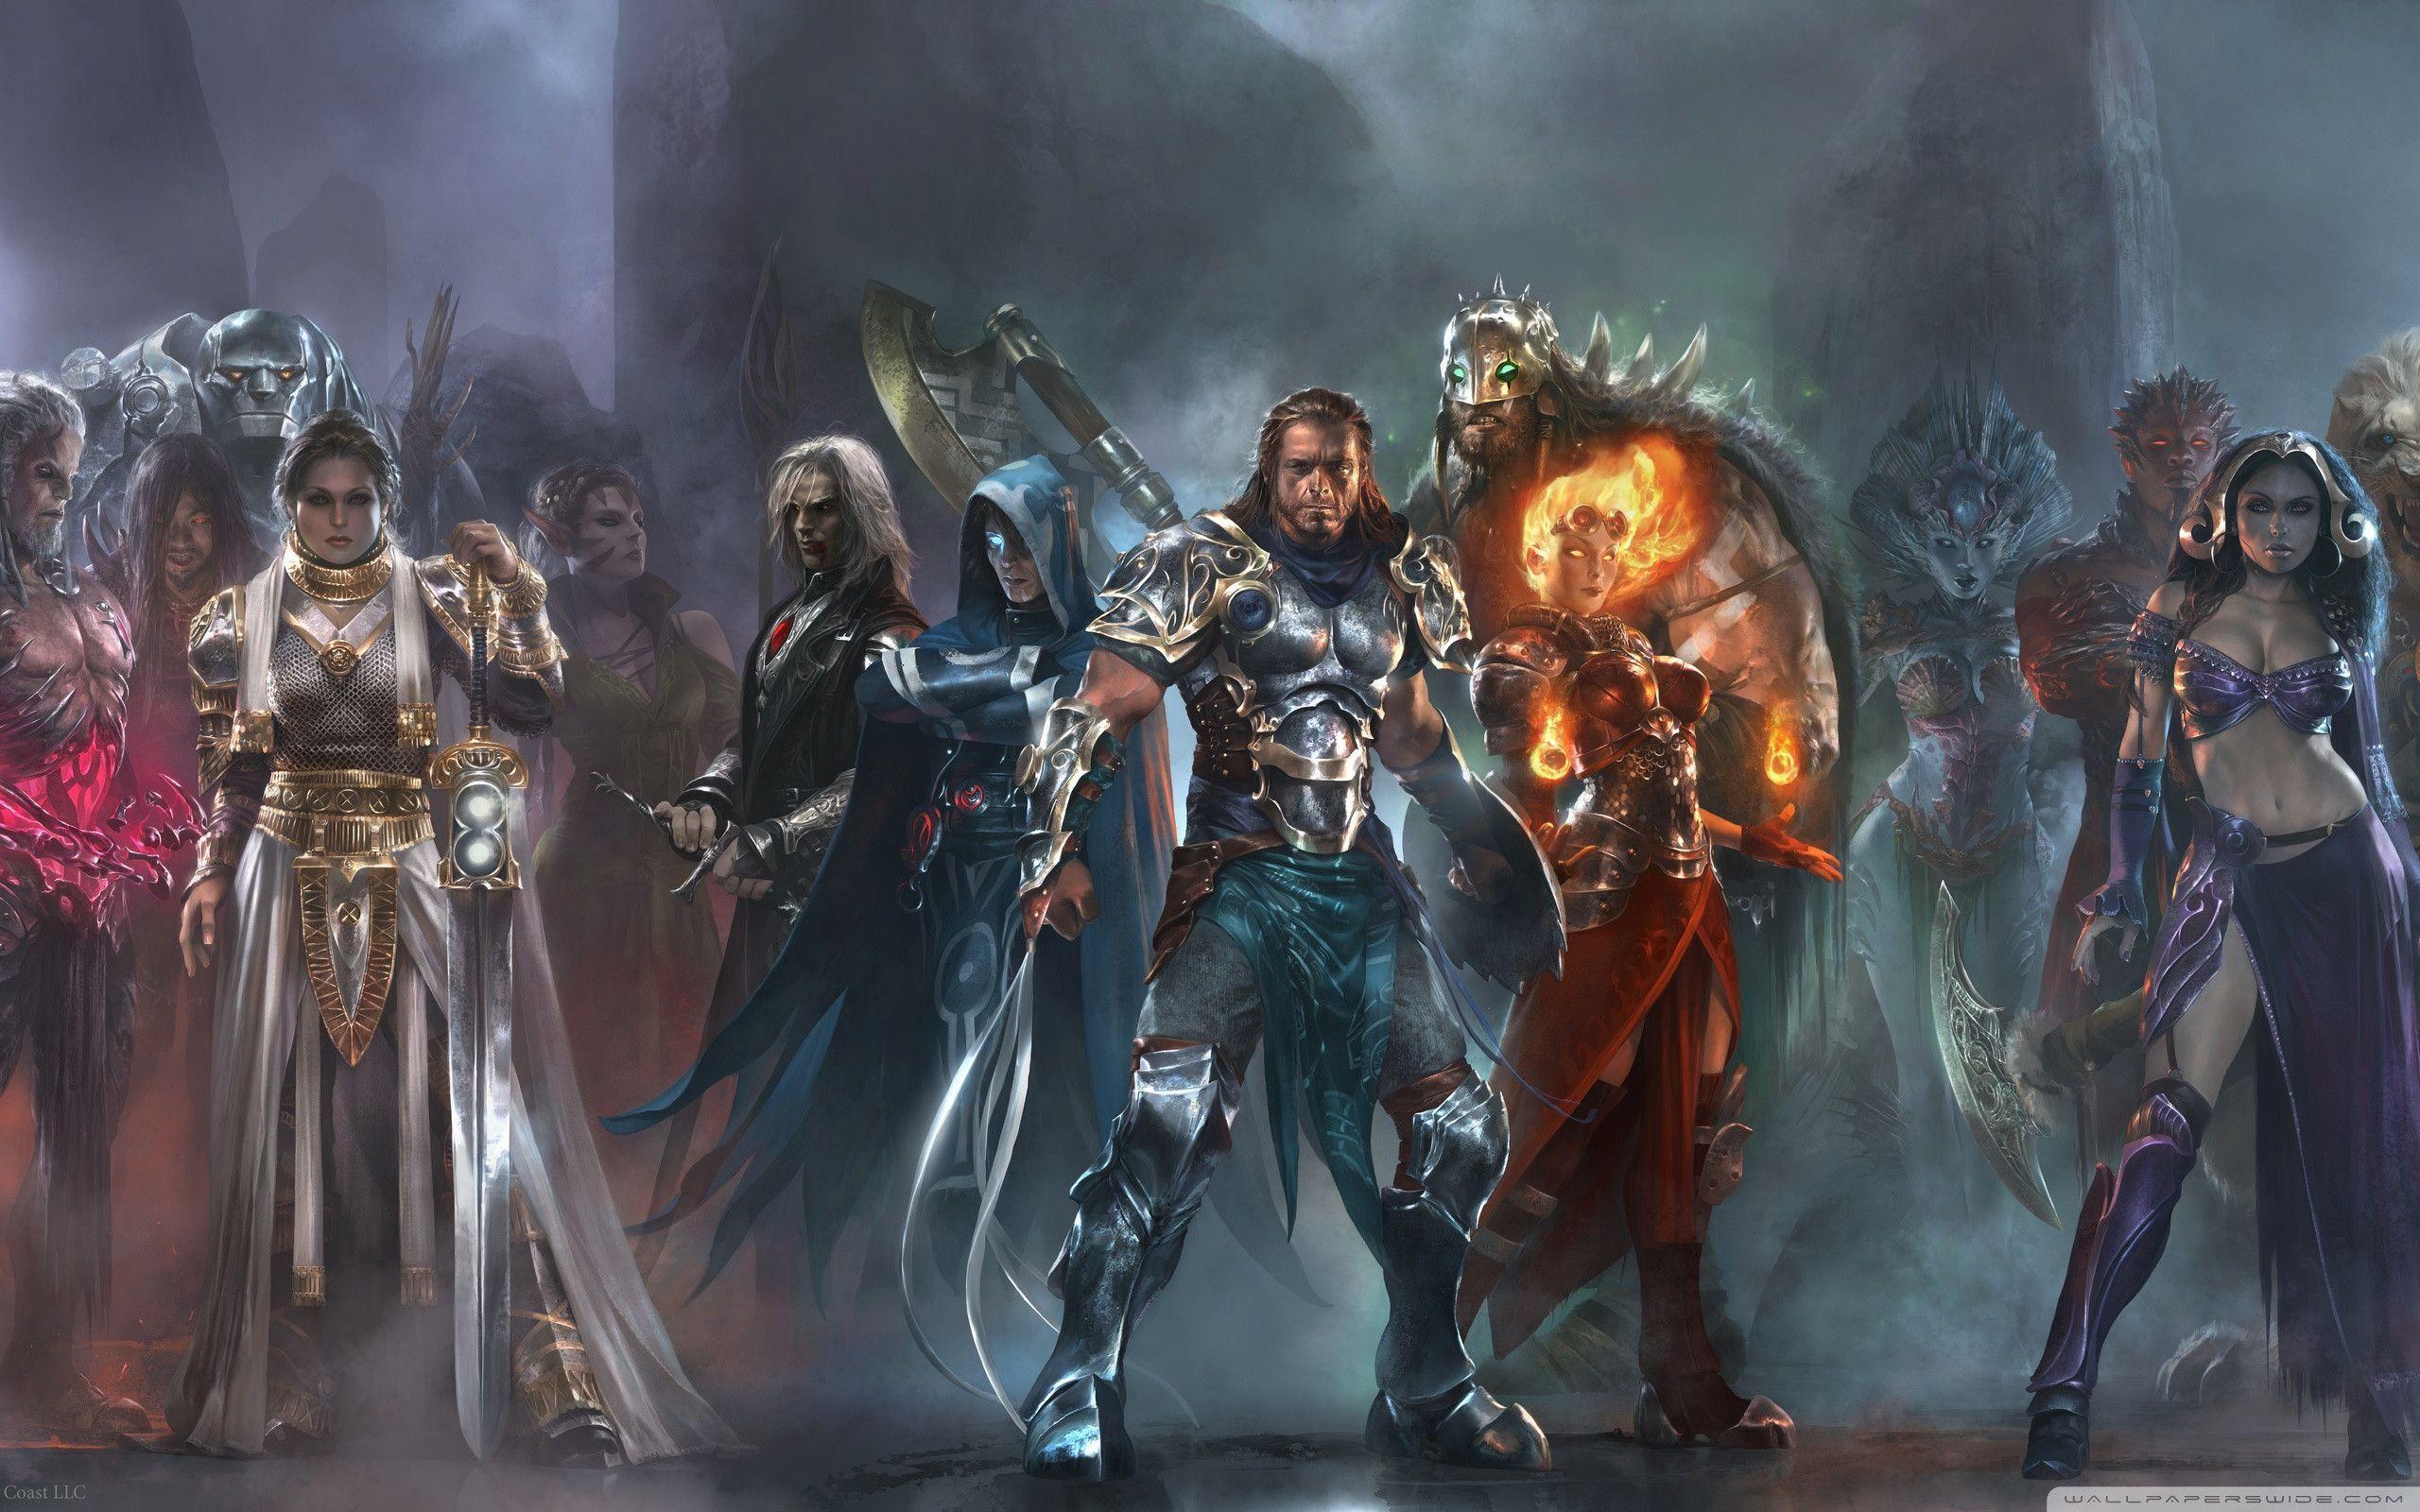 Magic: The Gathering Cool Wallpaper 19048 Image. largepict